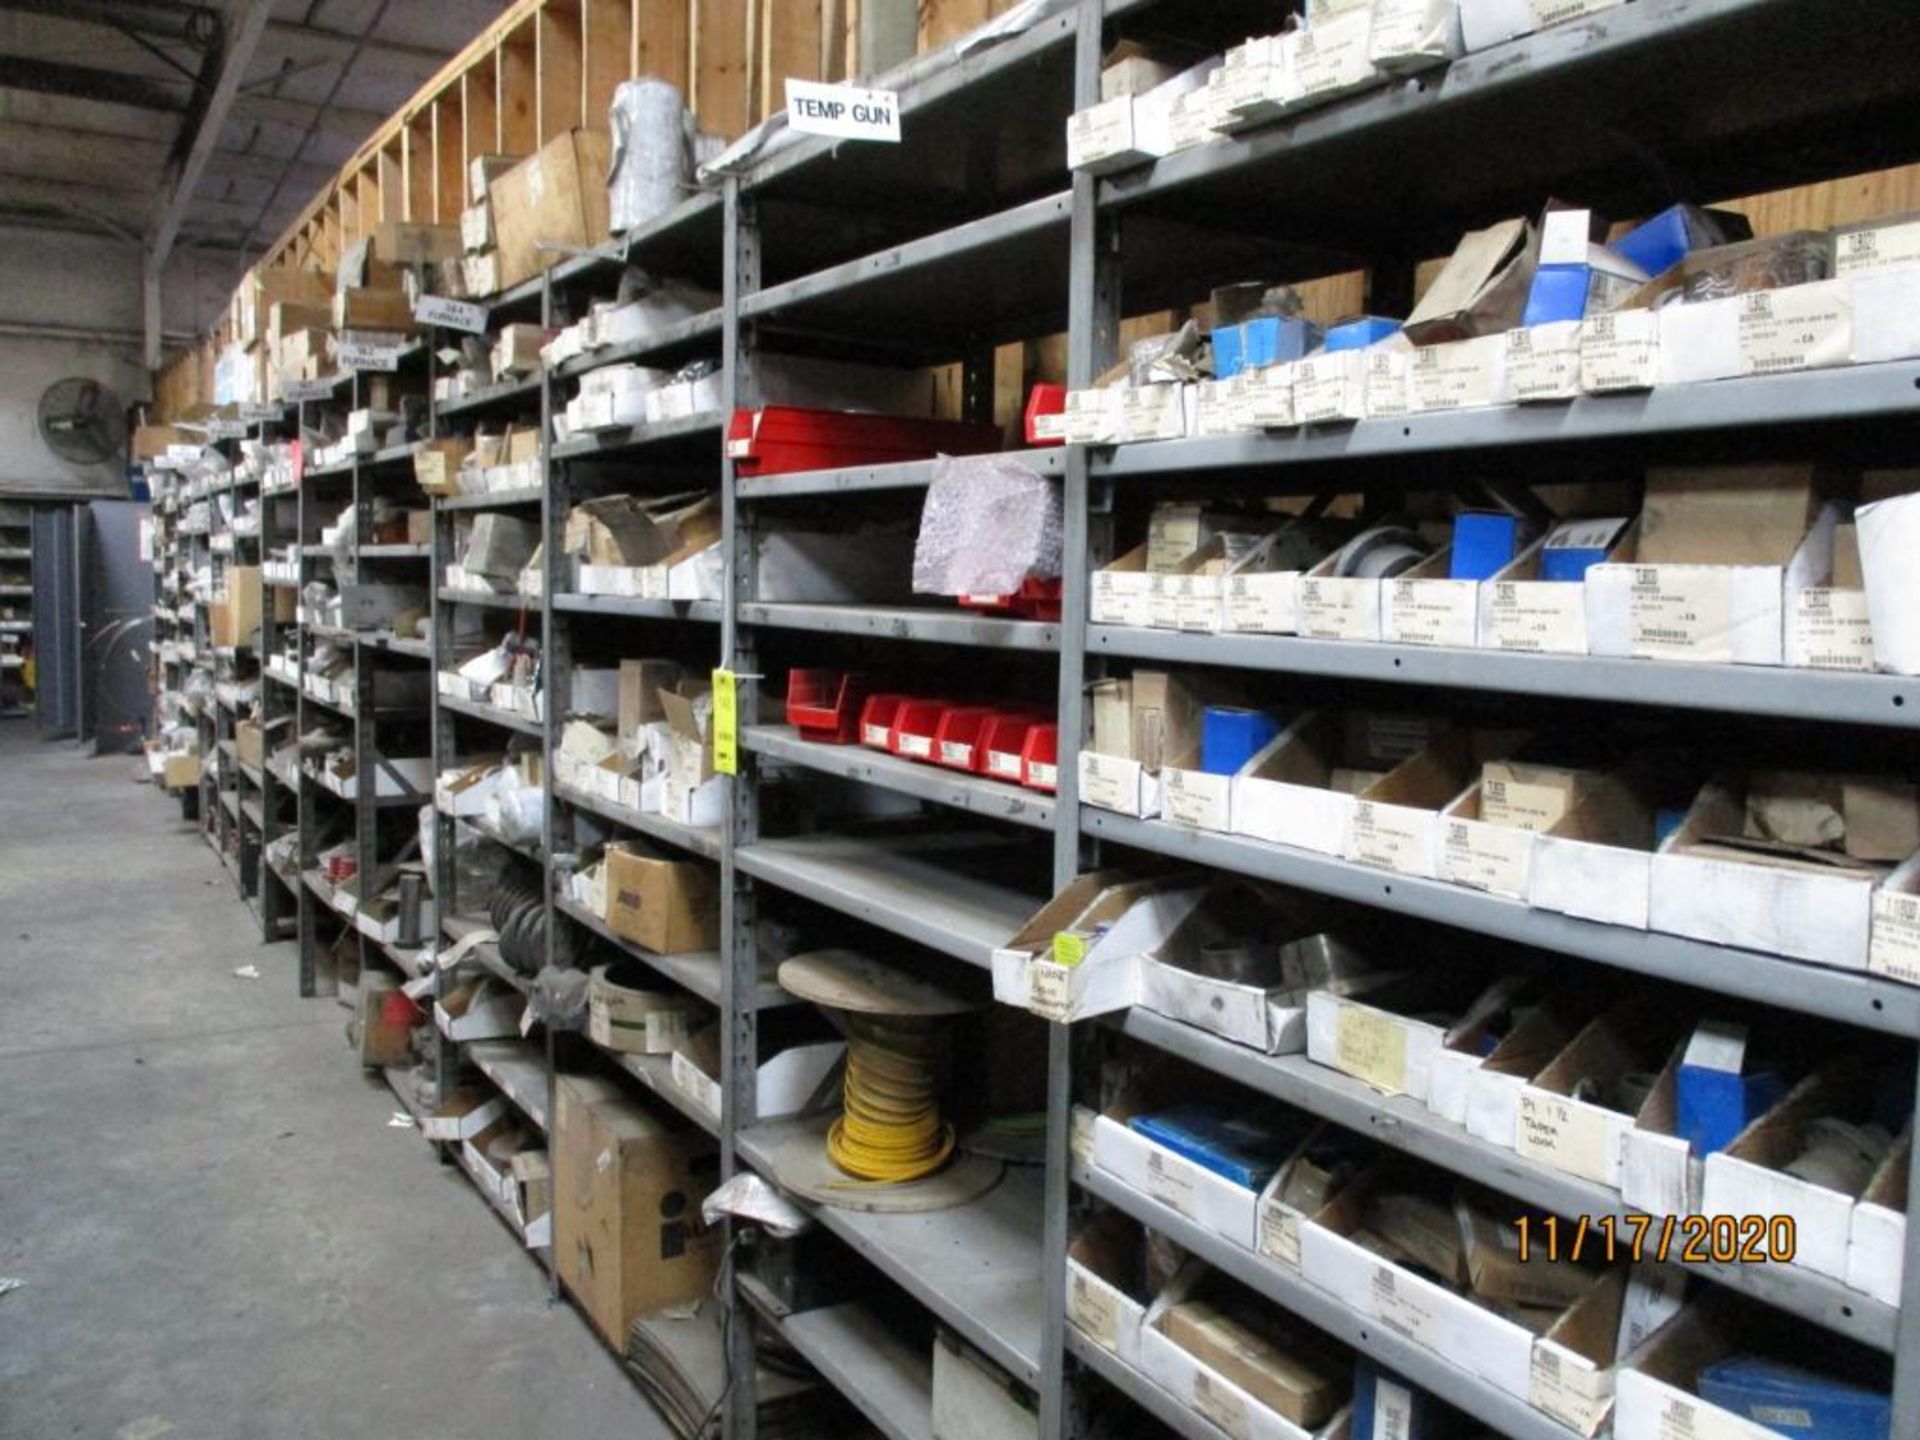 LOT: (14) Sections Metal Shelving, with Contents consisting of Assorted Medium Frequency Furnace